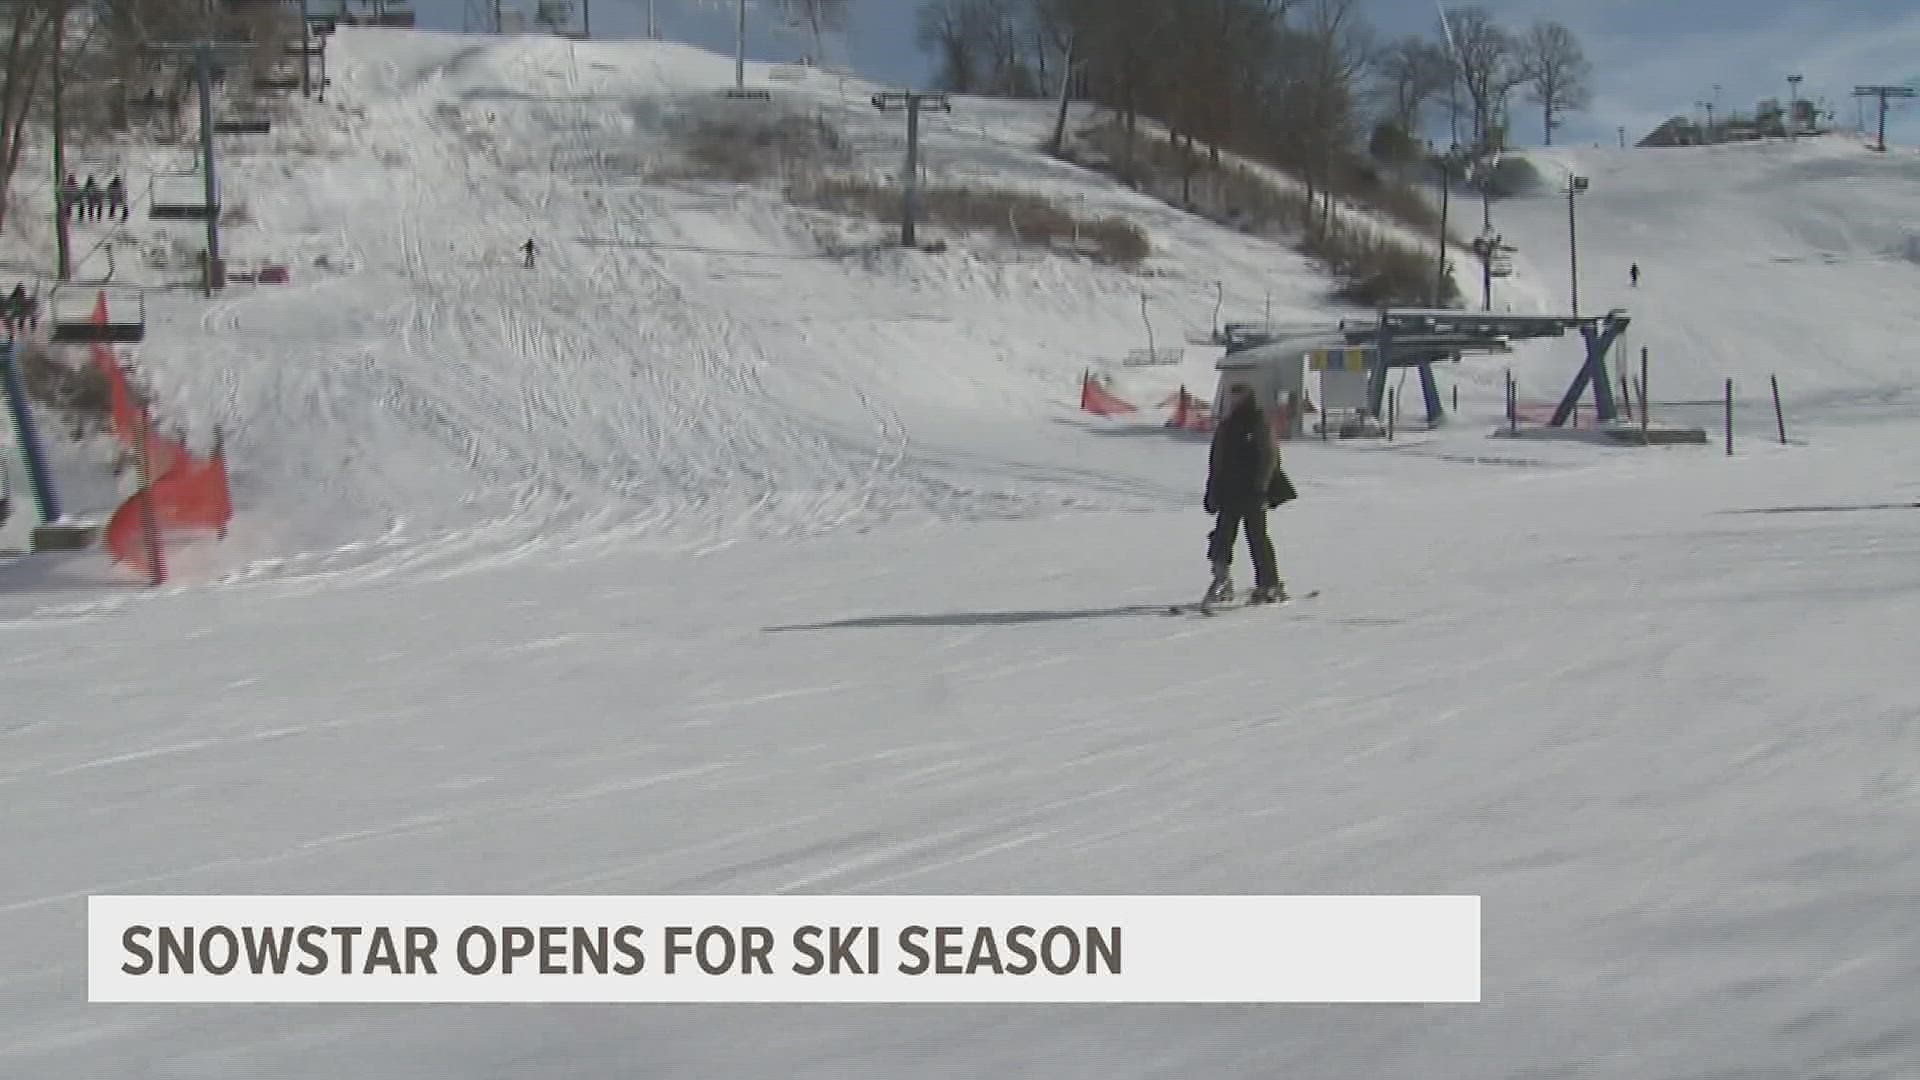 For the first time this season, guests can ski down Snowstar's slopes